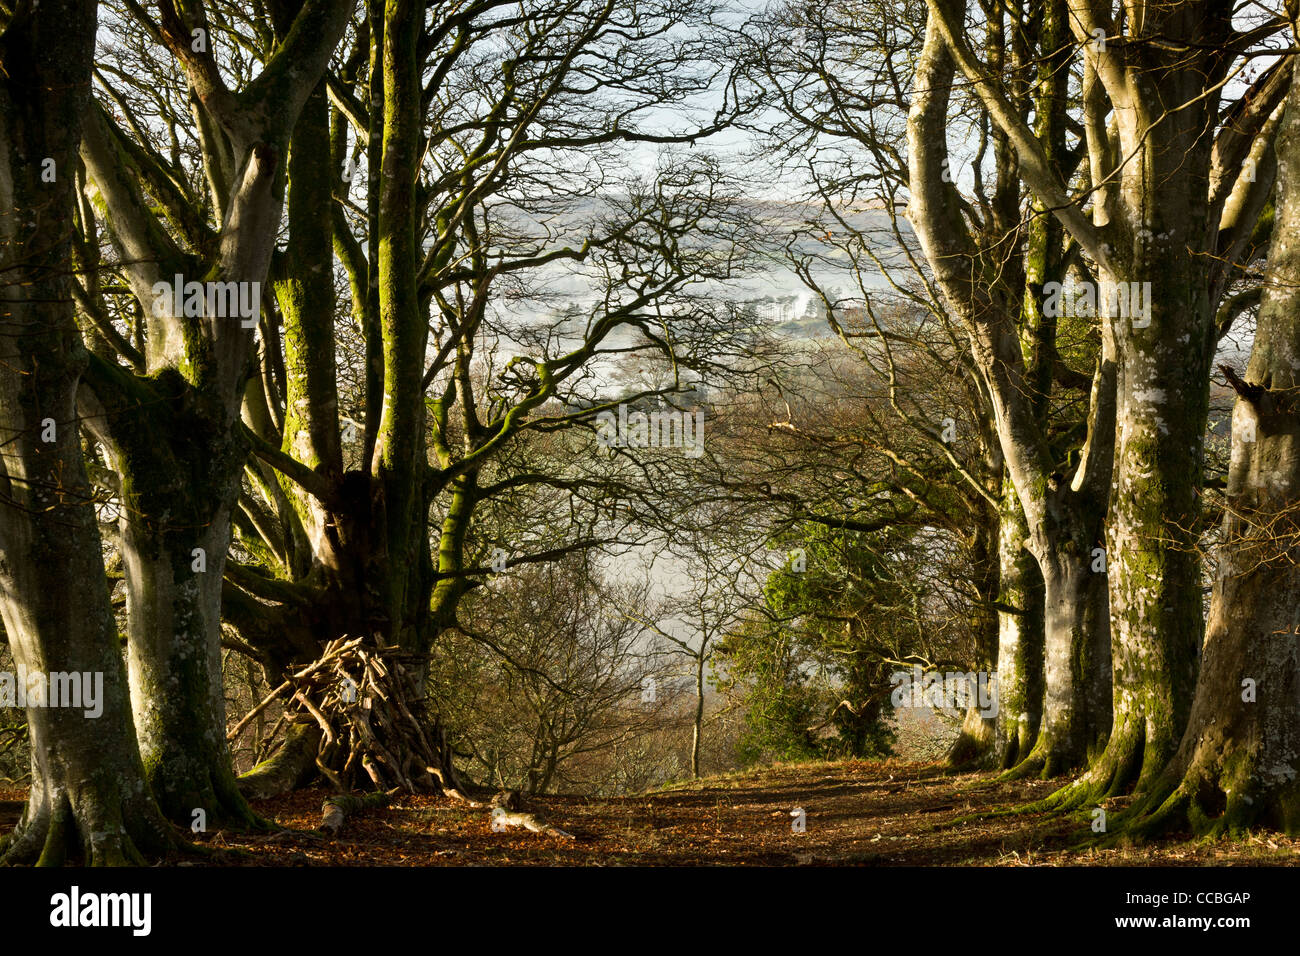 Old beech trees in Whiddon, or Whyddon Deer Park. 16th century old park, Teign Valley, Dartmoor. Stock Photo